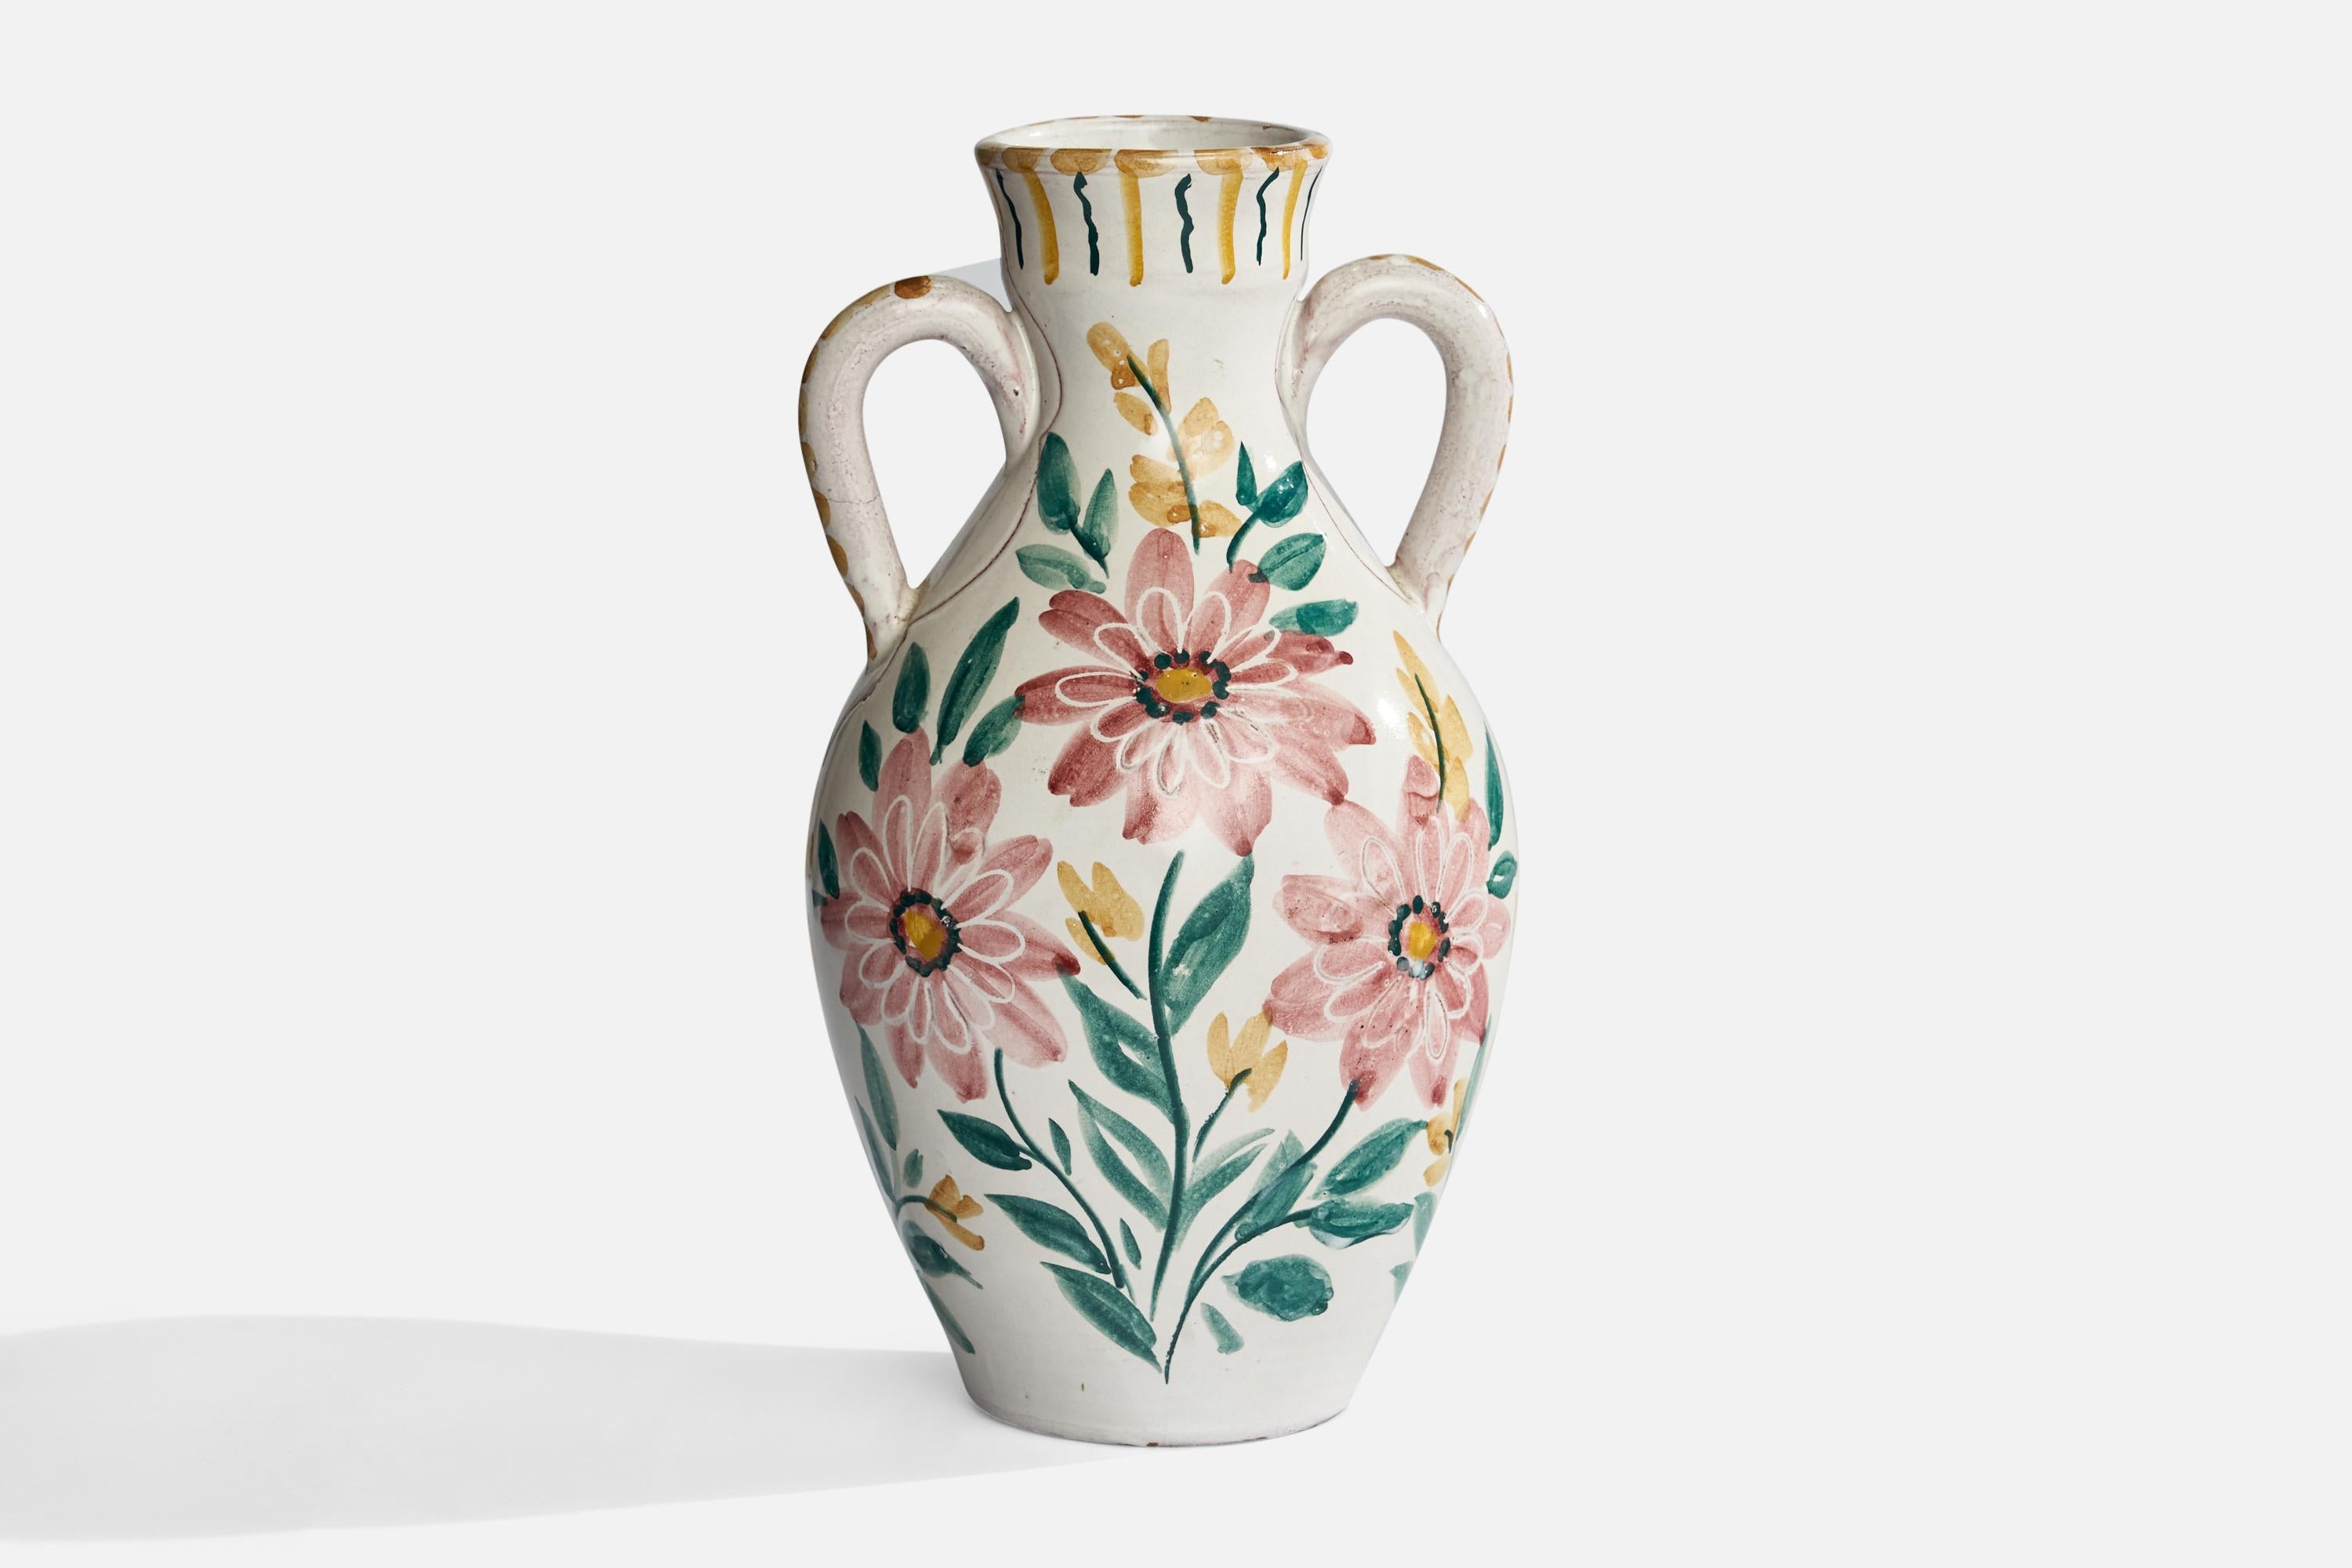 A hand-painted white ceramic vase designed and produced in Sweden, 1940s.